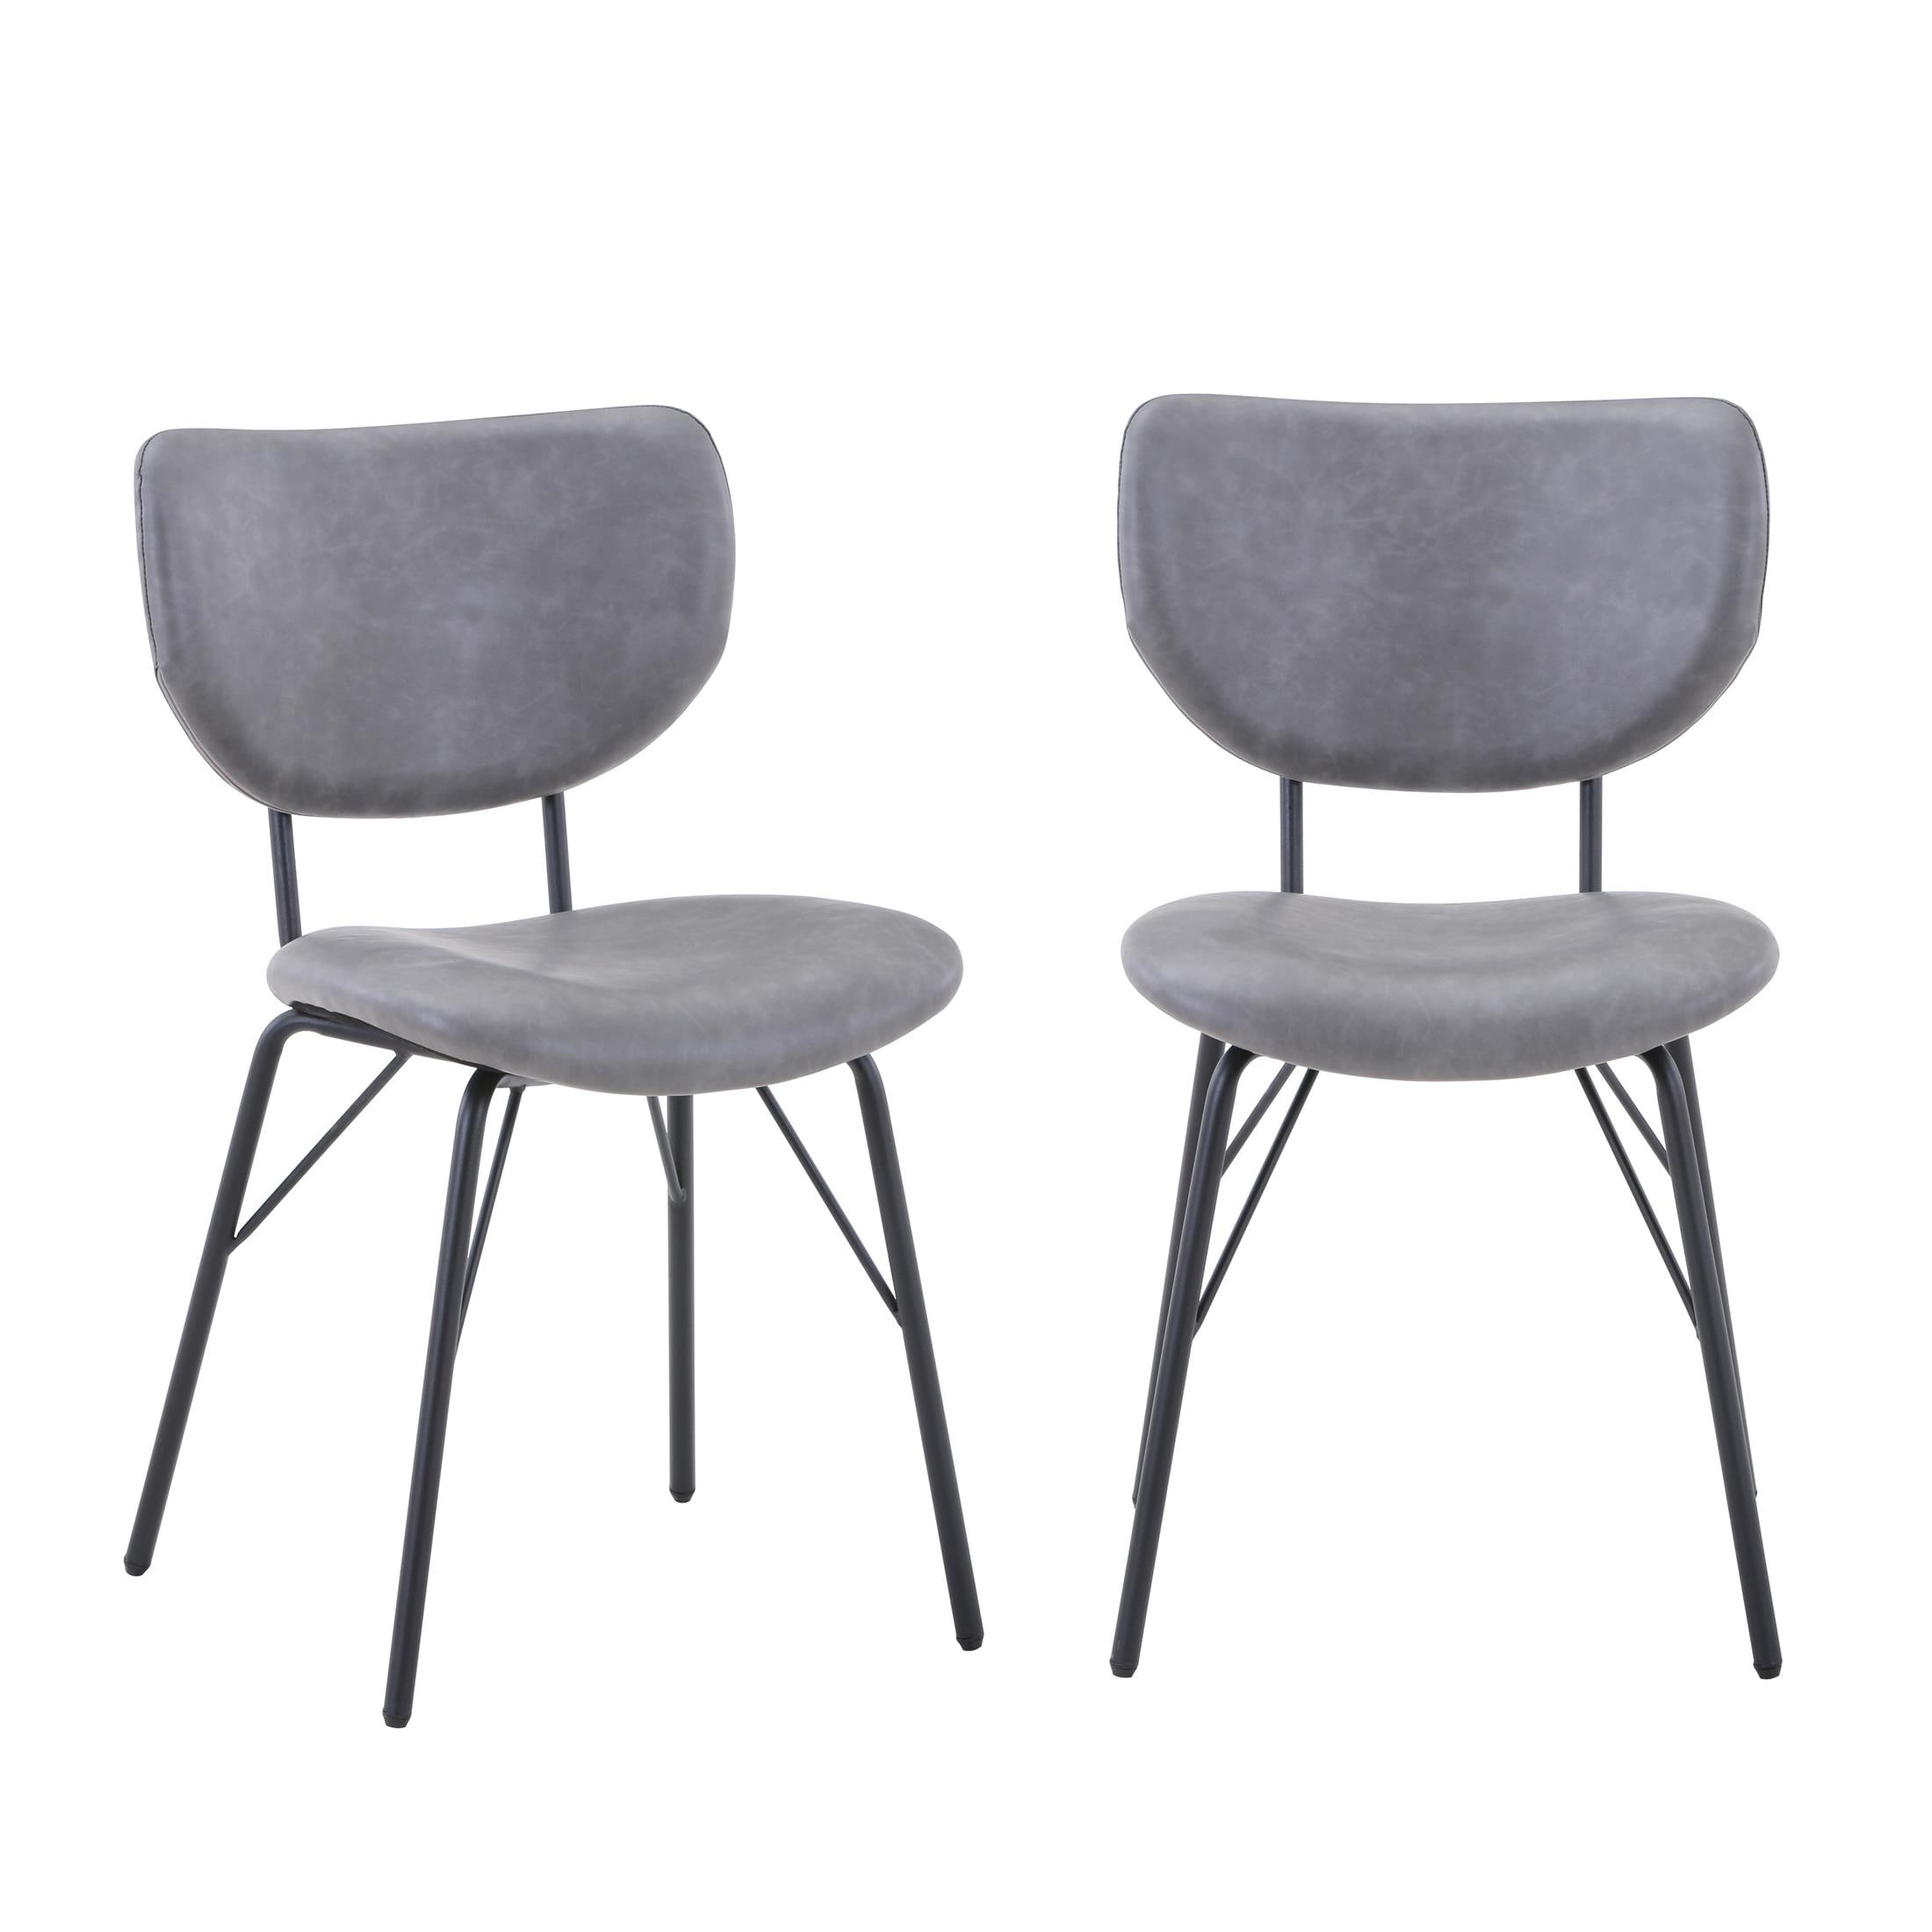 Remy Upholstered Chair in Grey